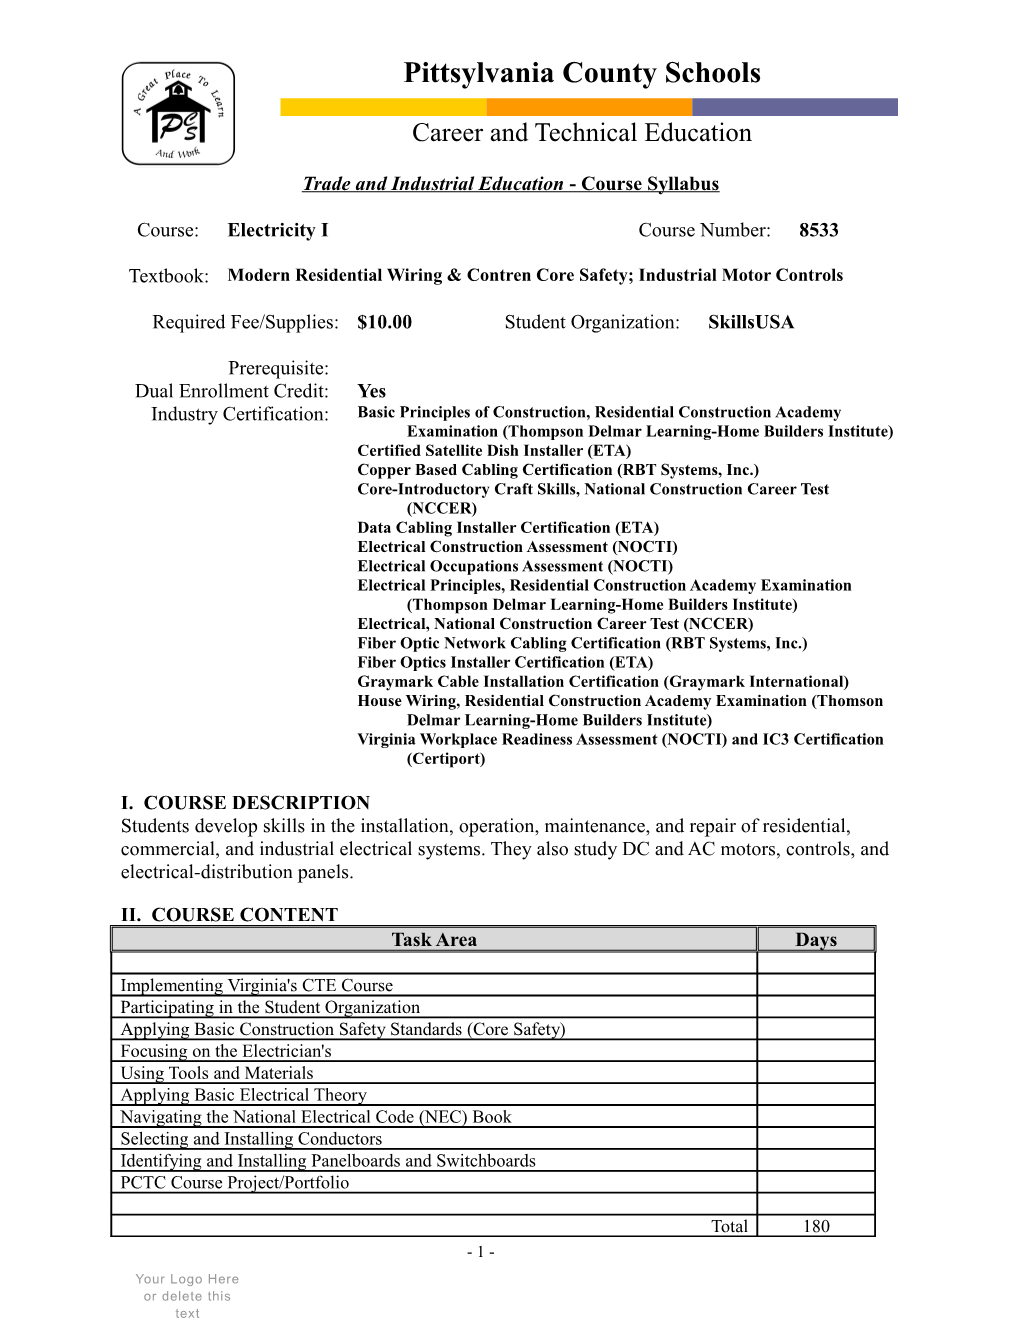 Agricultural Education Course Syllabus s3